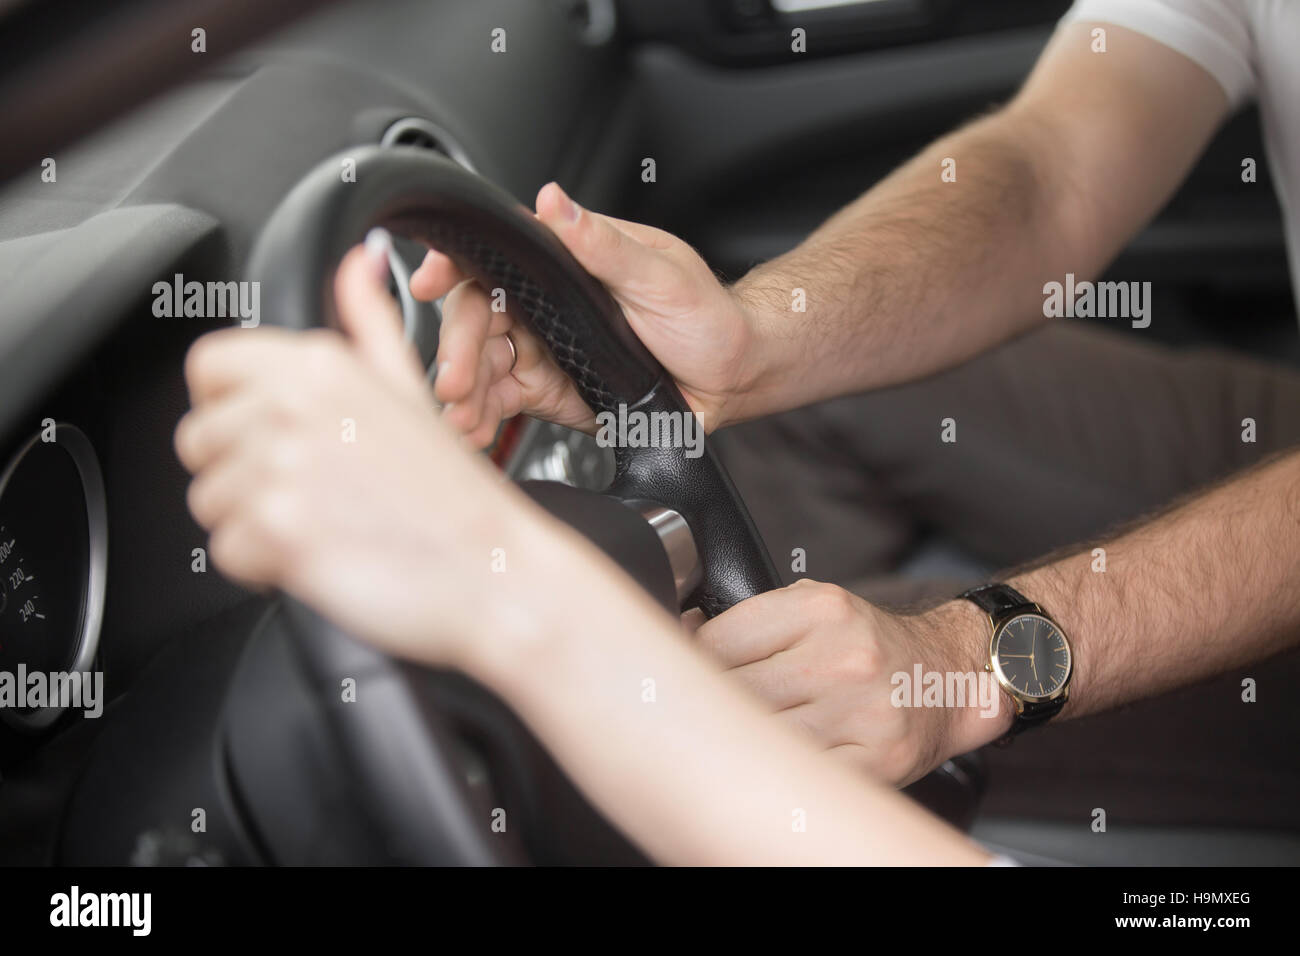 Man trying to take control of the steering wheel Stock Photo